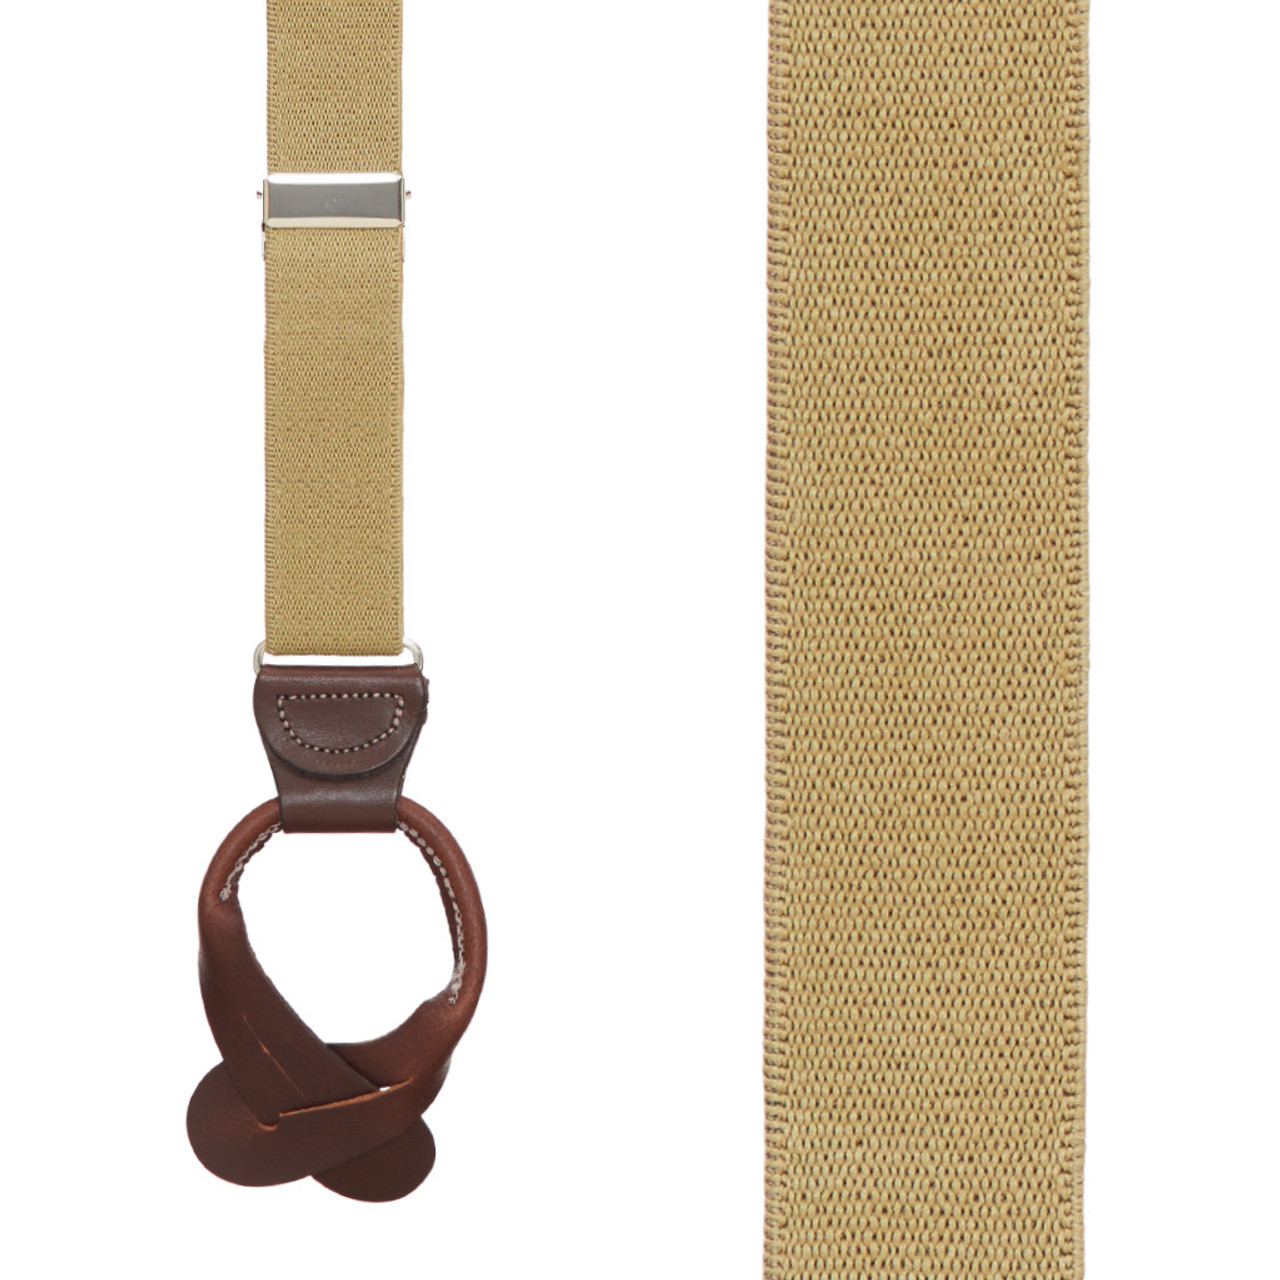 https://cdn11.bigcommerce.com/s-kfd5yug4bp/images/stencil/1280x1280/products/4157/4047/tan-solid-color-button-suspenders-1-inch-wide-2__58560.1662137684.jpg?c=2